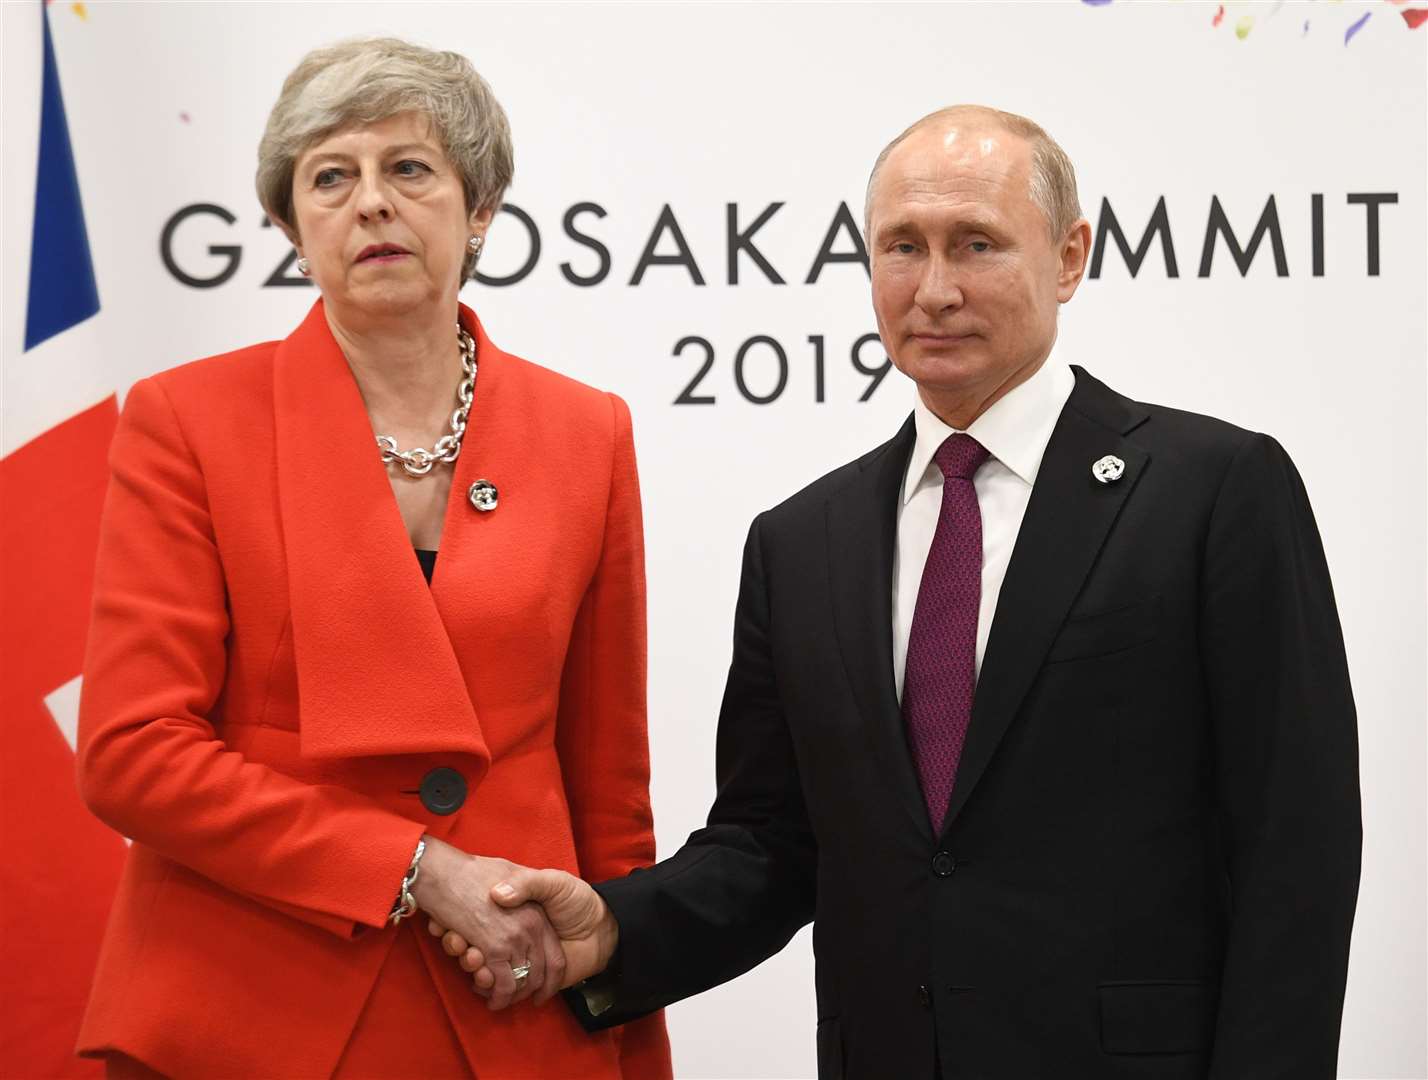 The Salisbury poisonings were discussed in a frosty meeting between President Putin and Mrs May in 2019 at the G20 (Stefan Rousseau/PA)